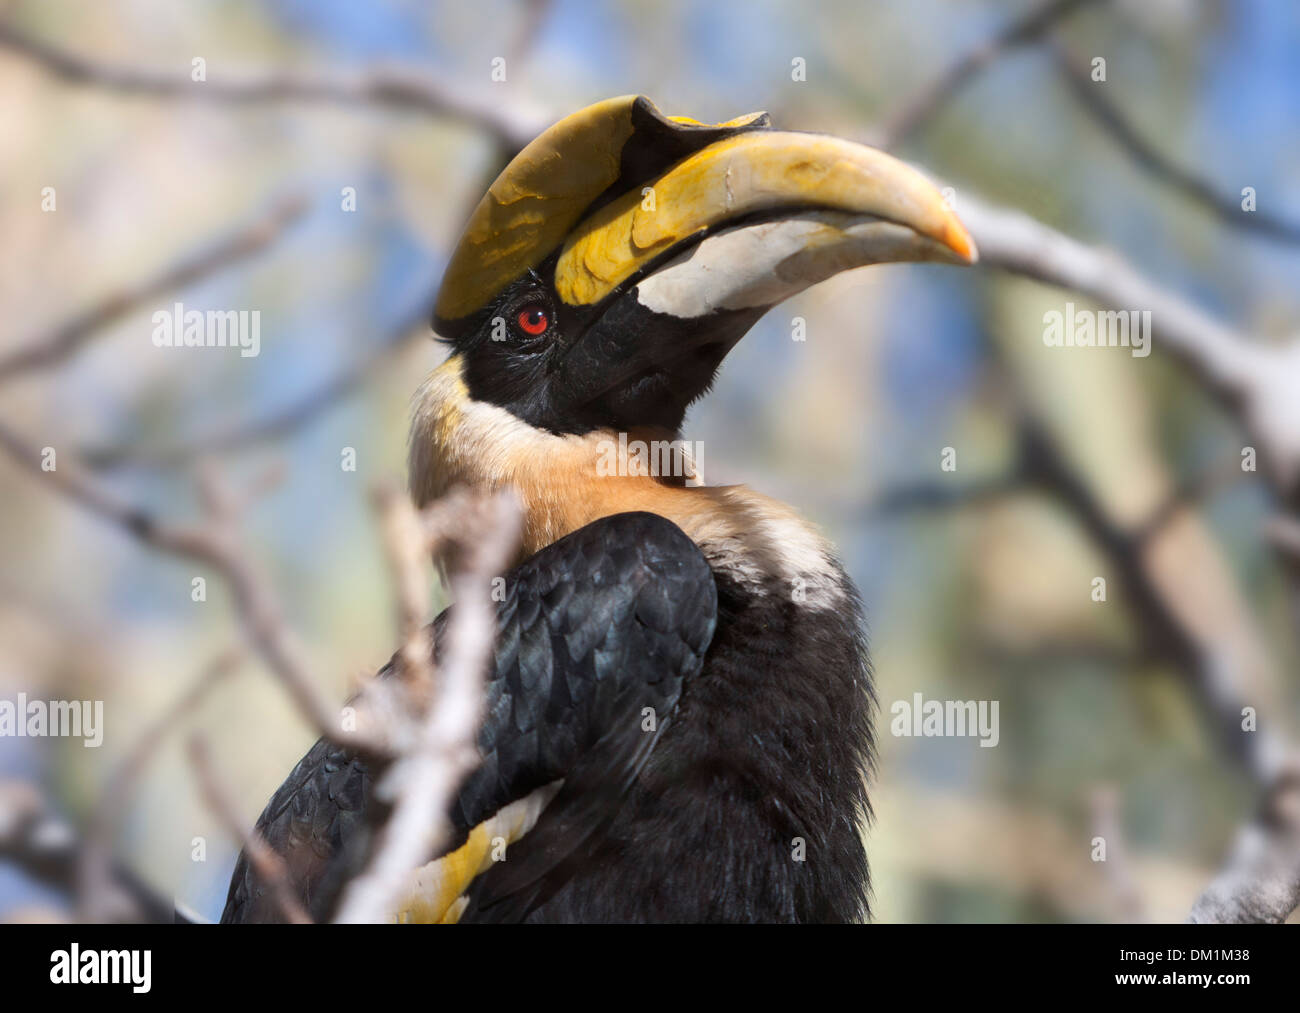 The great hornbill (Buceros bicornis) also known as the great Indian hornbill or great pied hornbill, Stock Photo